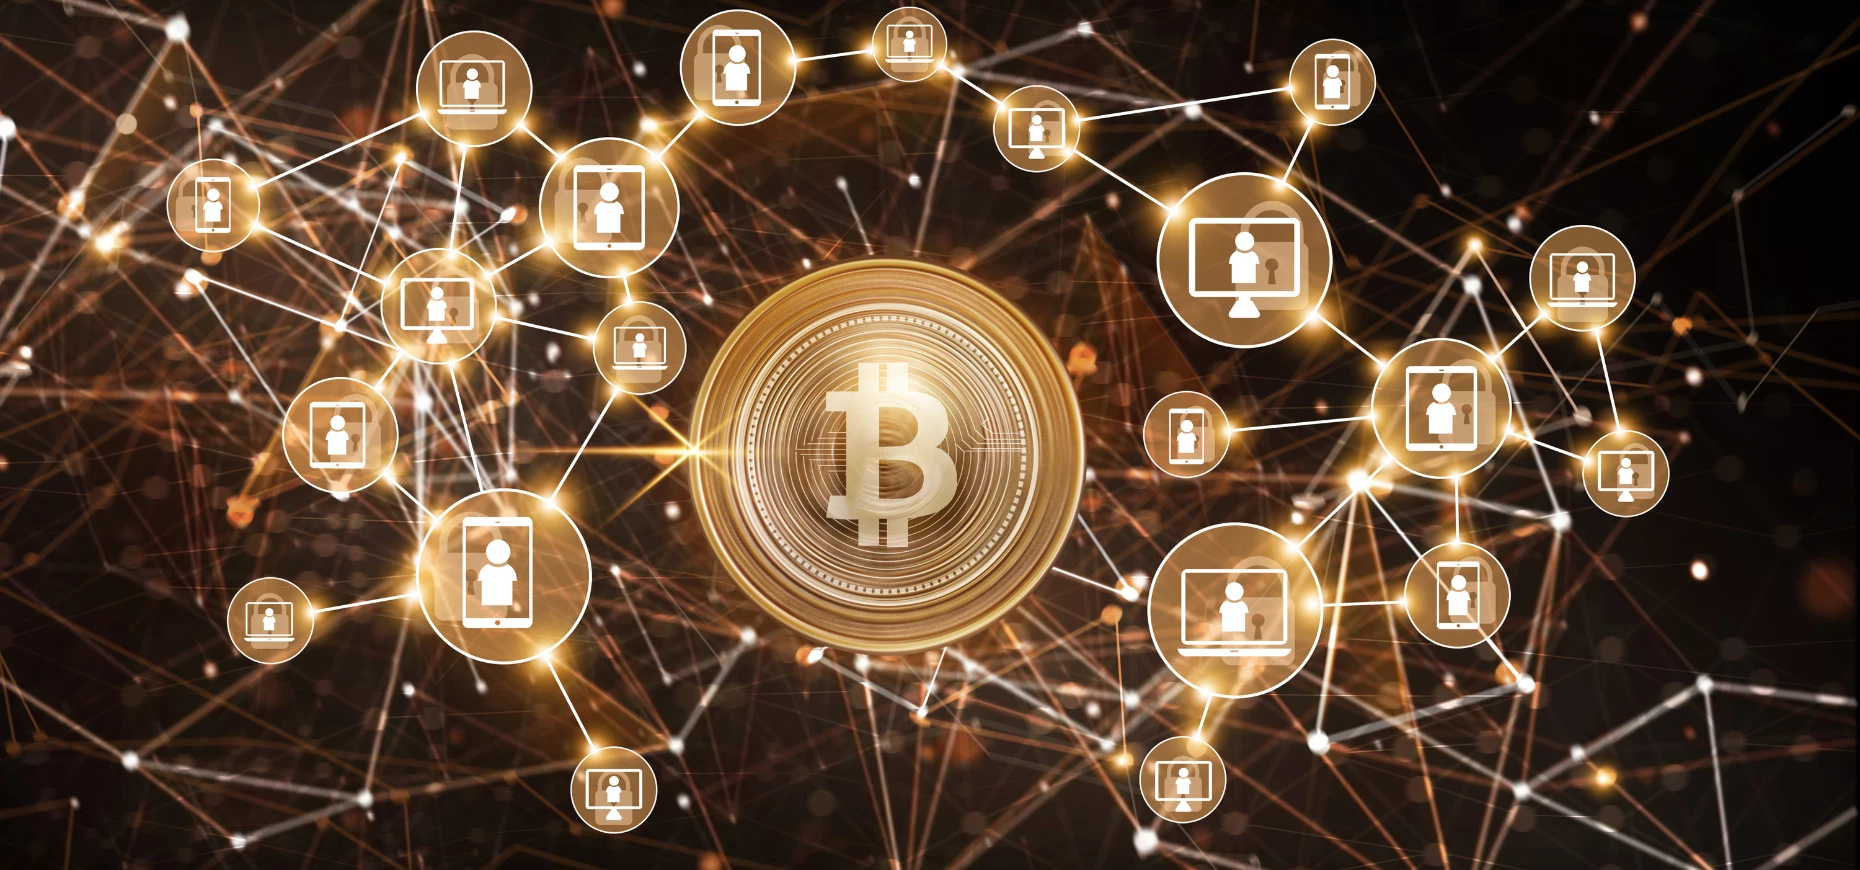 A CG image depicting the Blockchain with a Bitcoin at the centre.